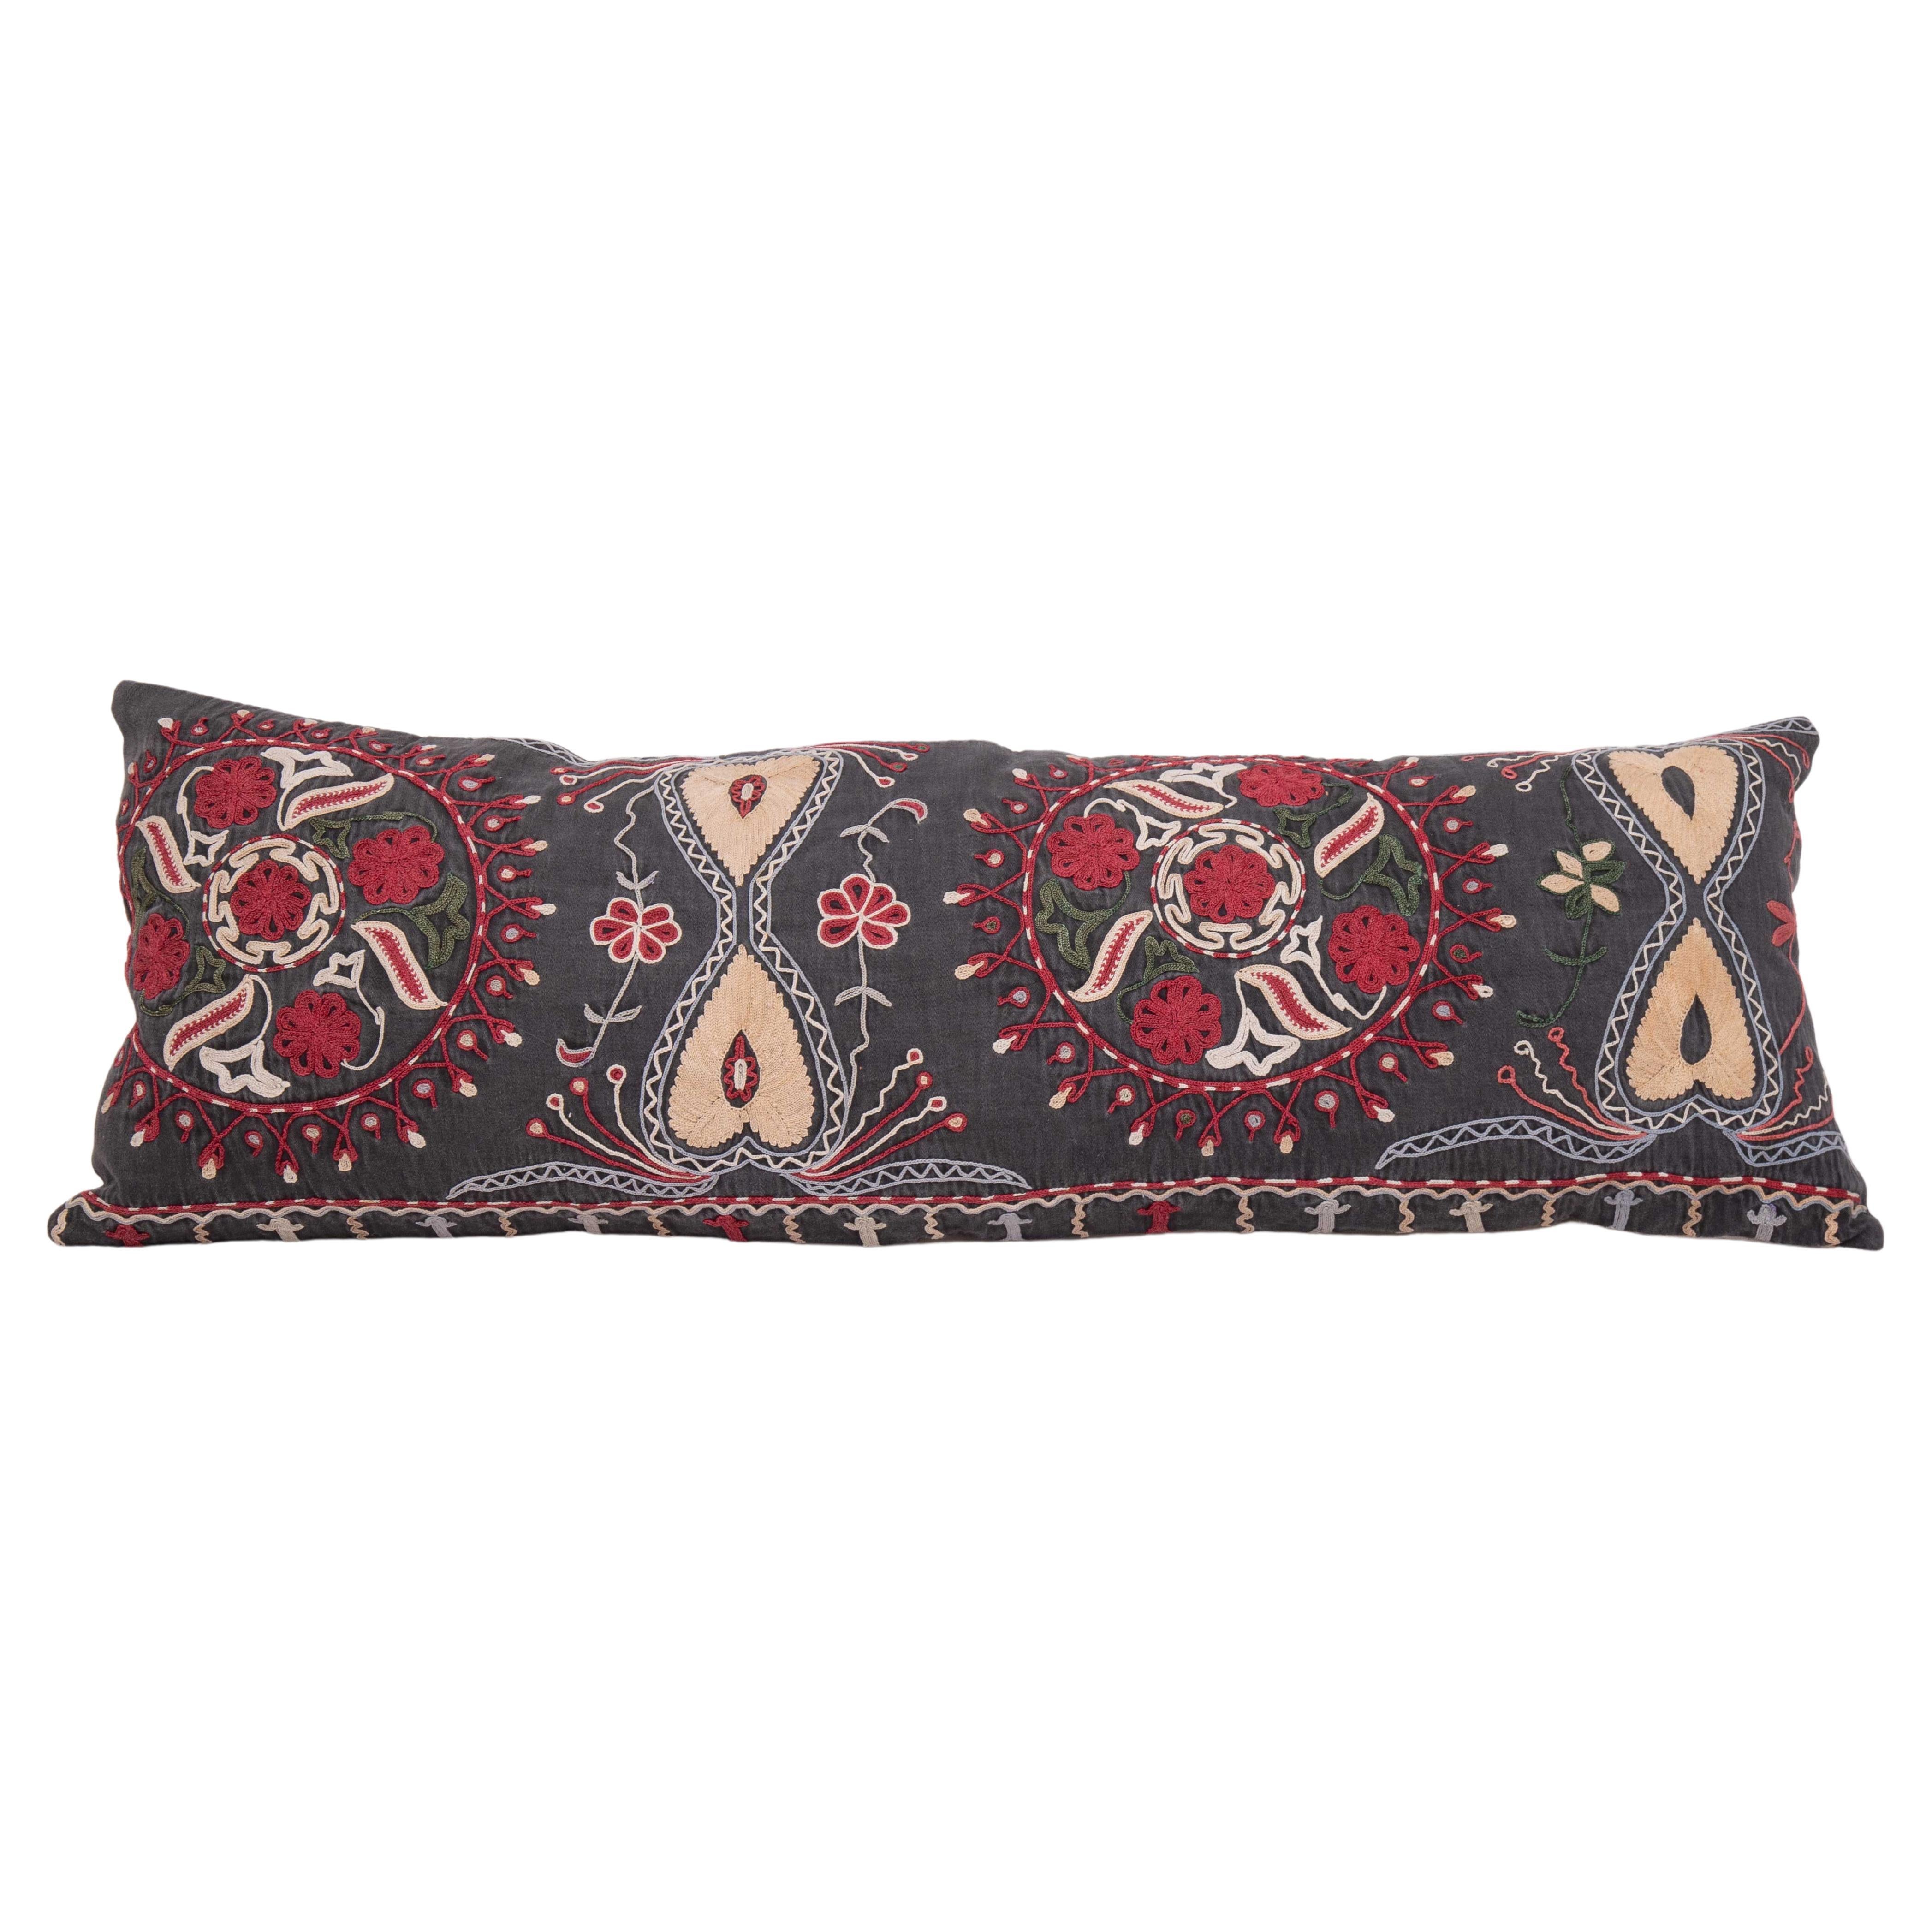 Lumbar Pillowcase Made from a Mid-20th C, Kazak / Kyrgyz Embroidery For Sale